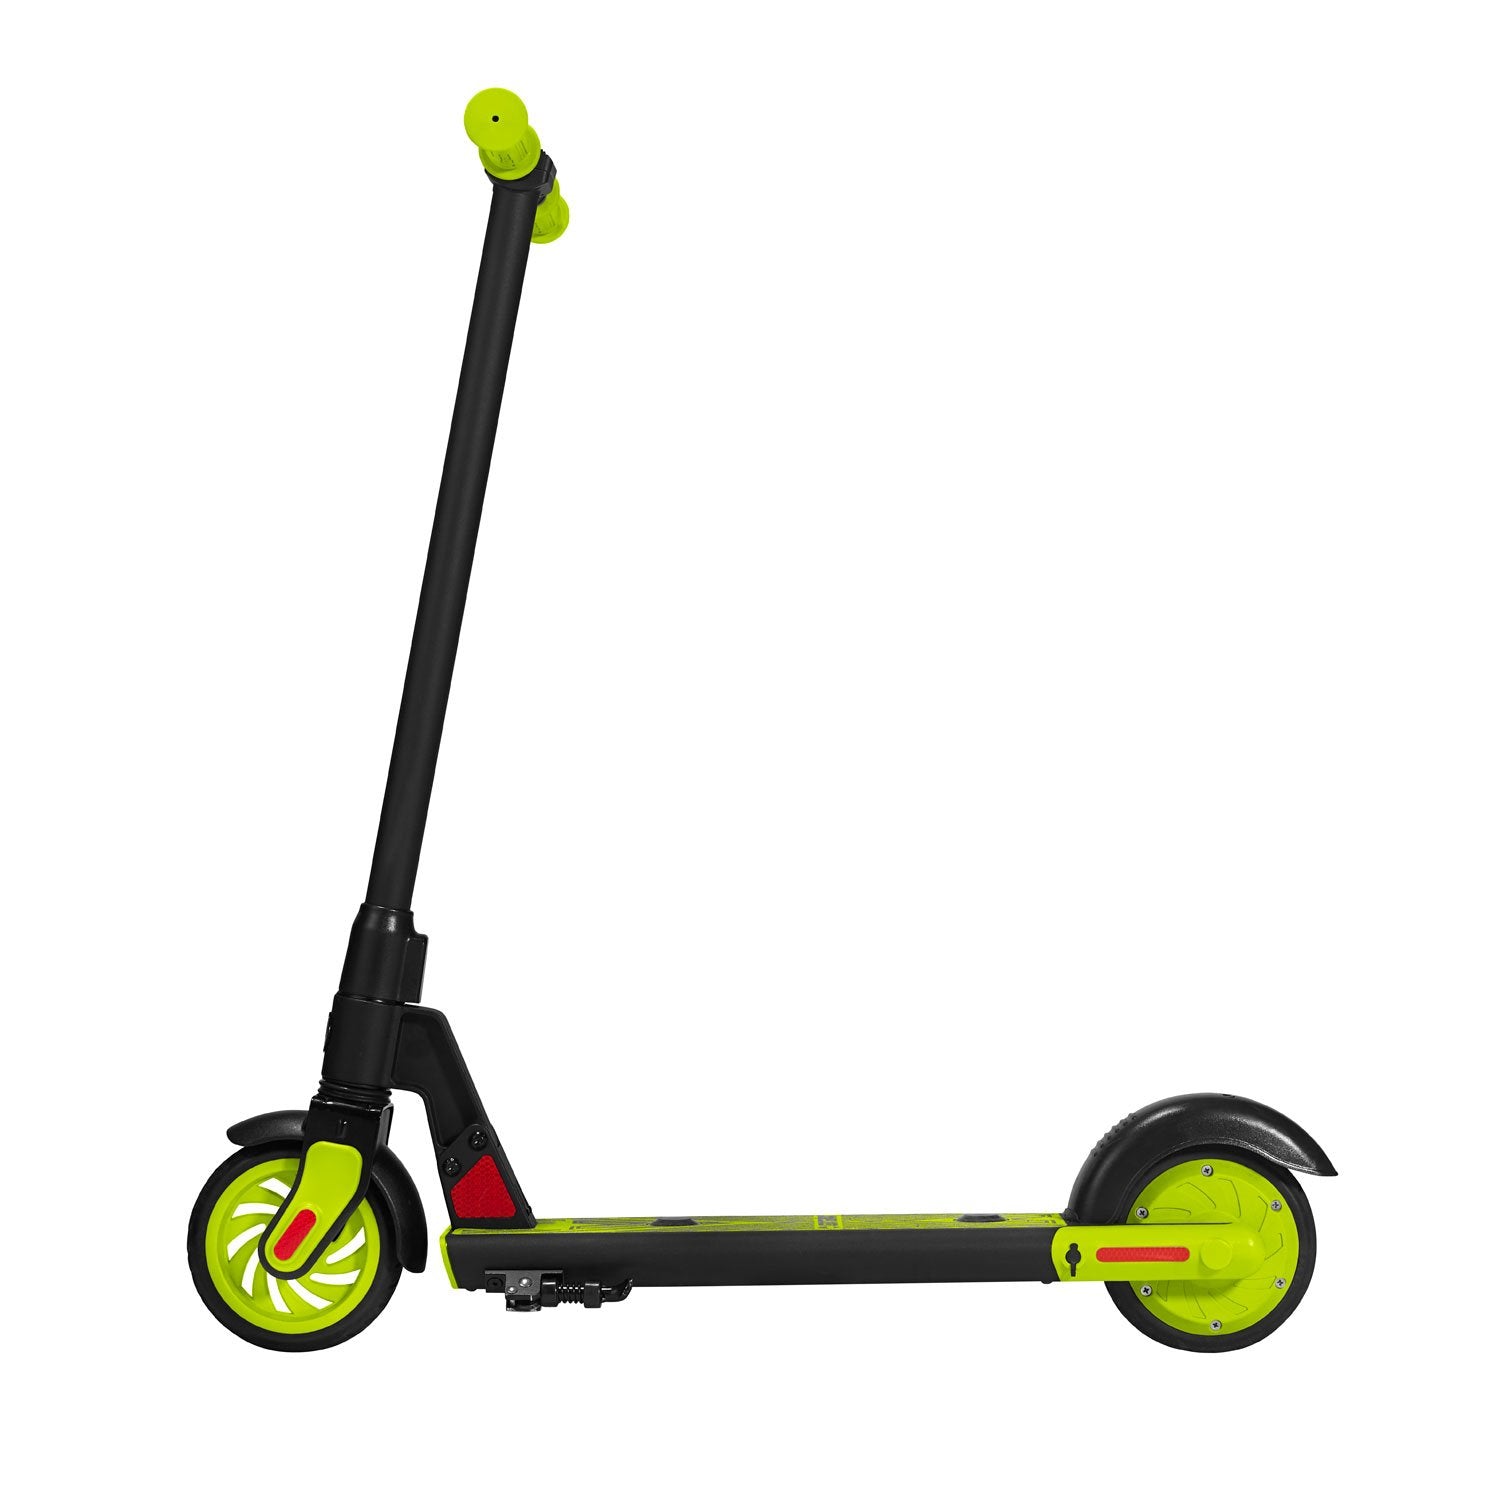 Green gks electric scooter for kids side image